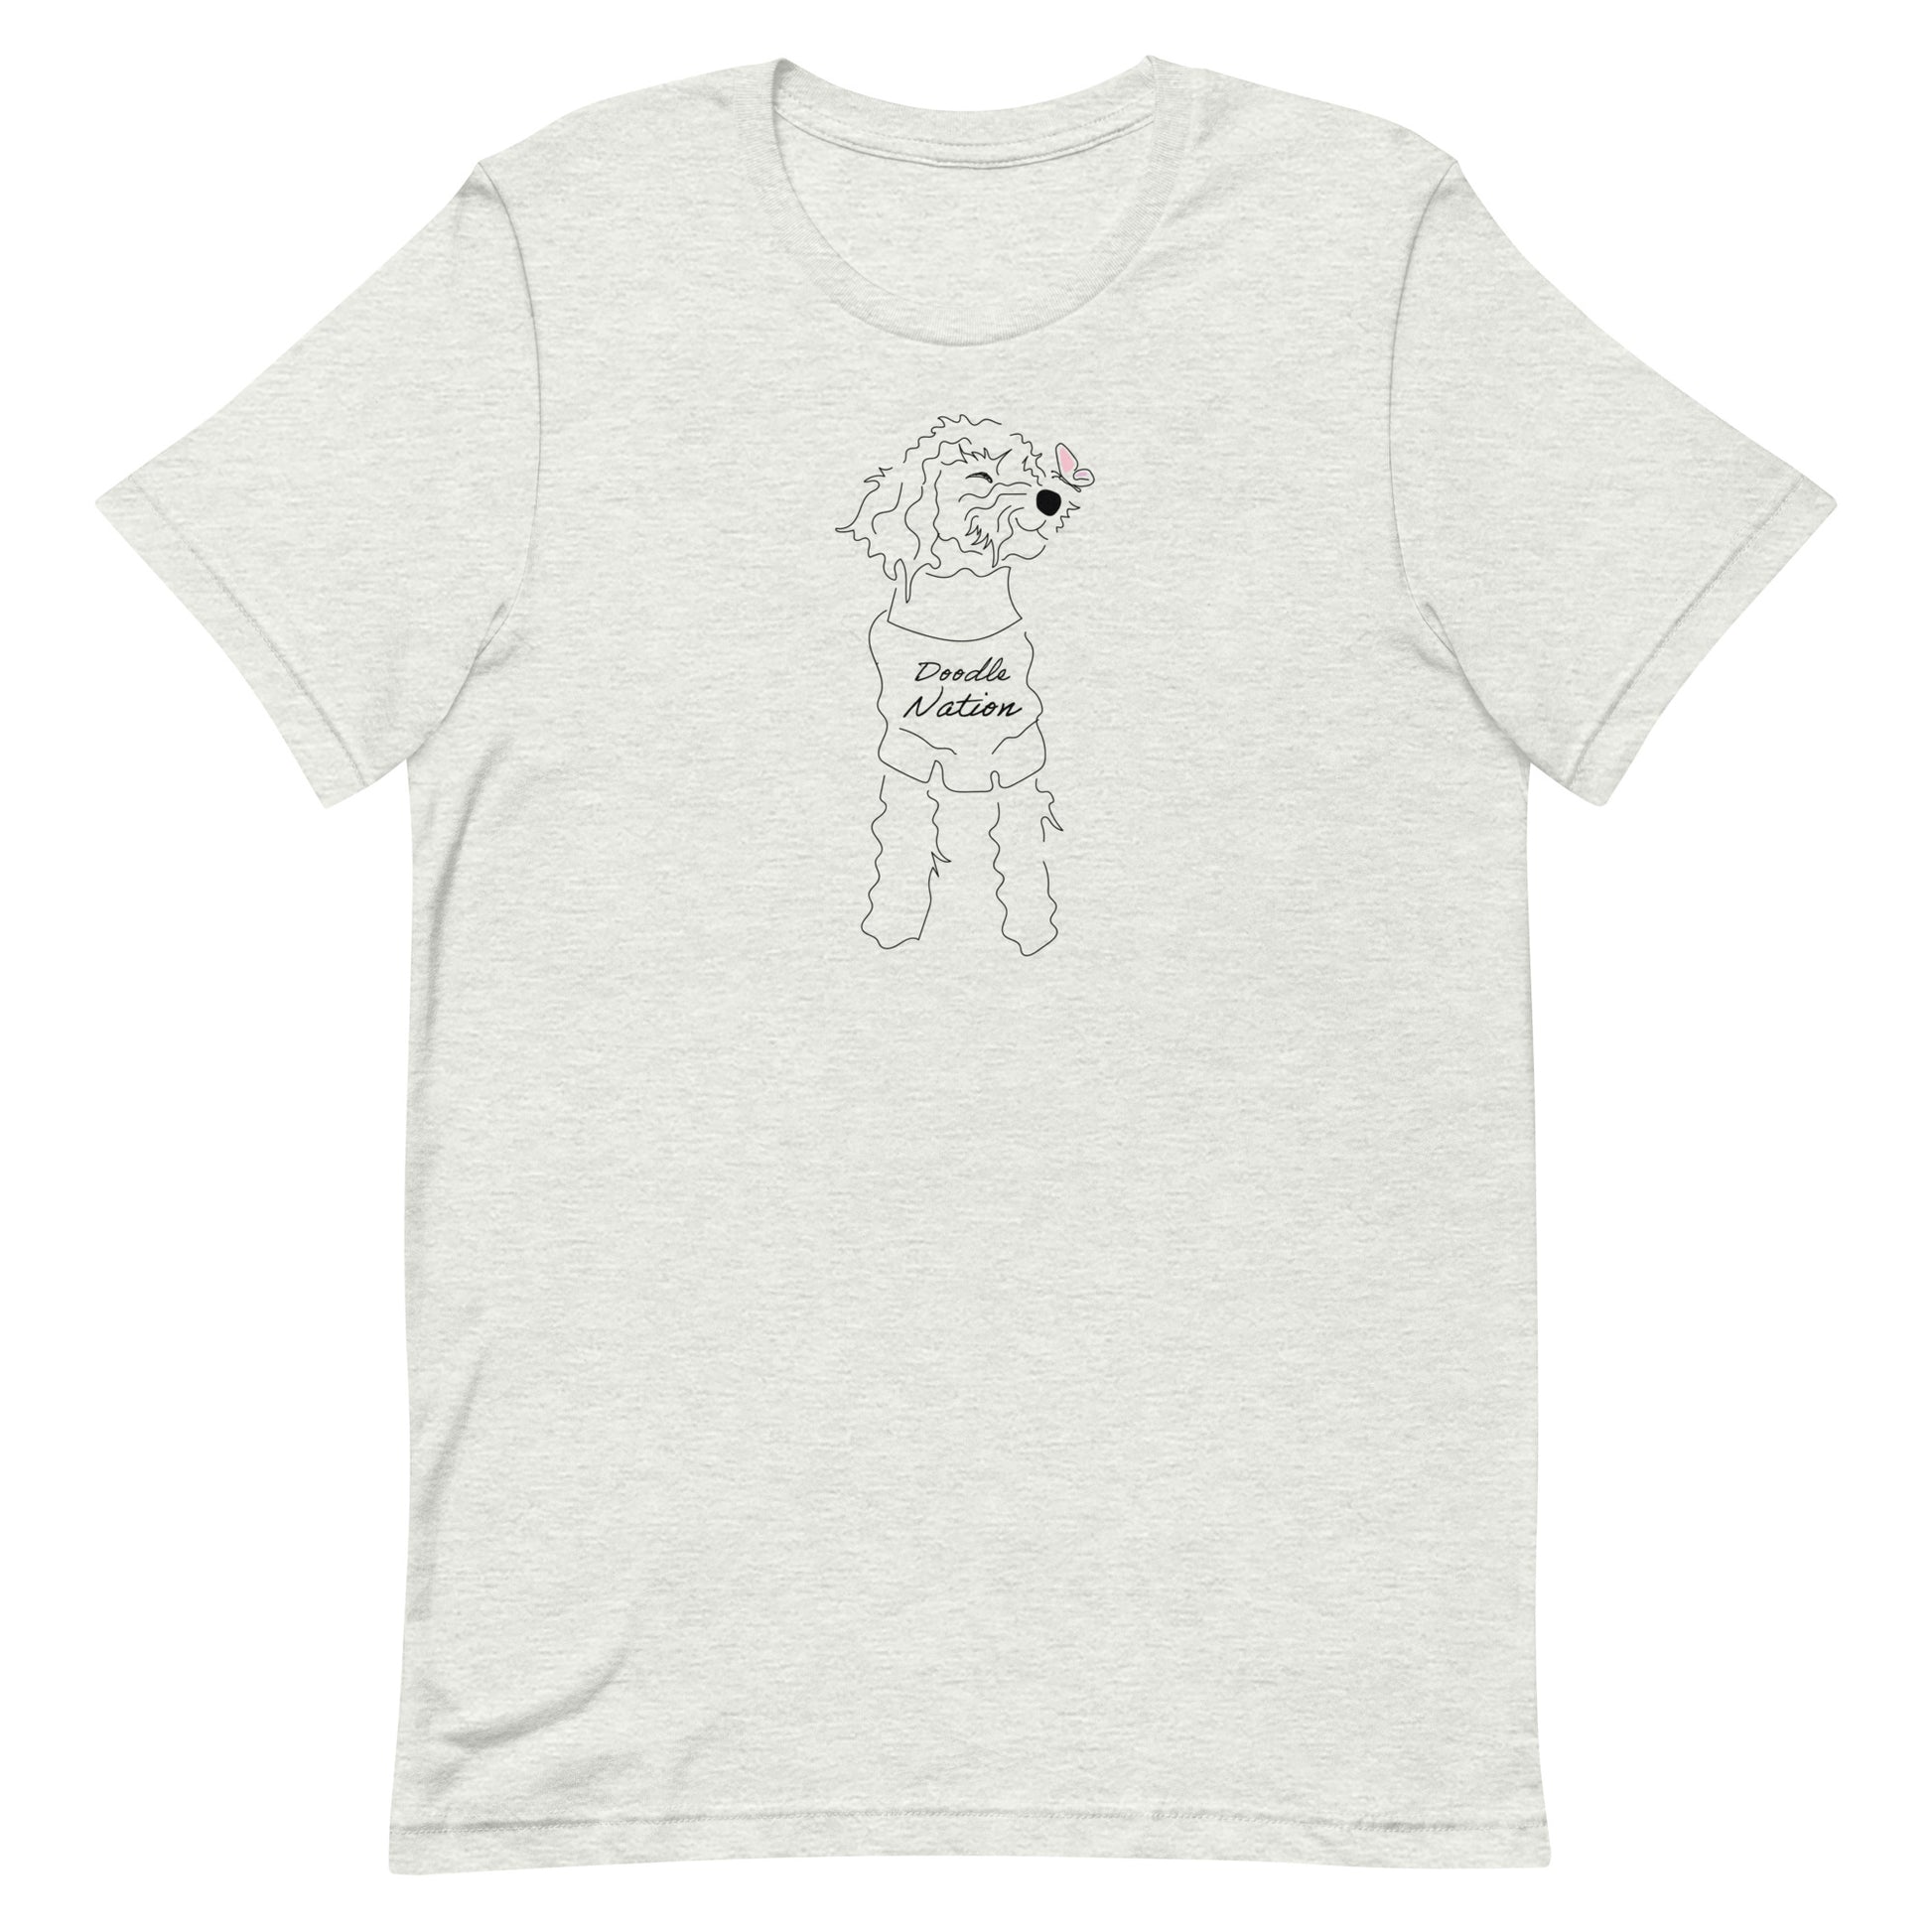 Goldendoodle t-shirt with Goldendoodle dog face and words "Doodle Nation" in ash color